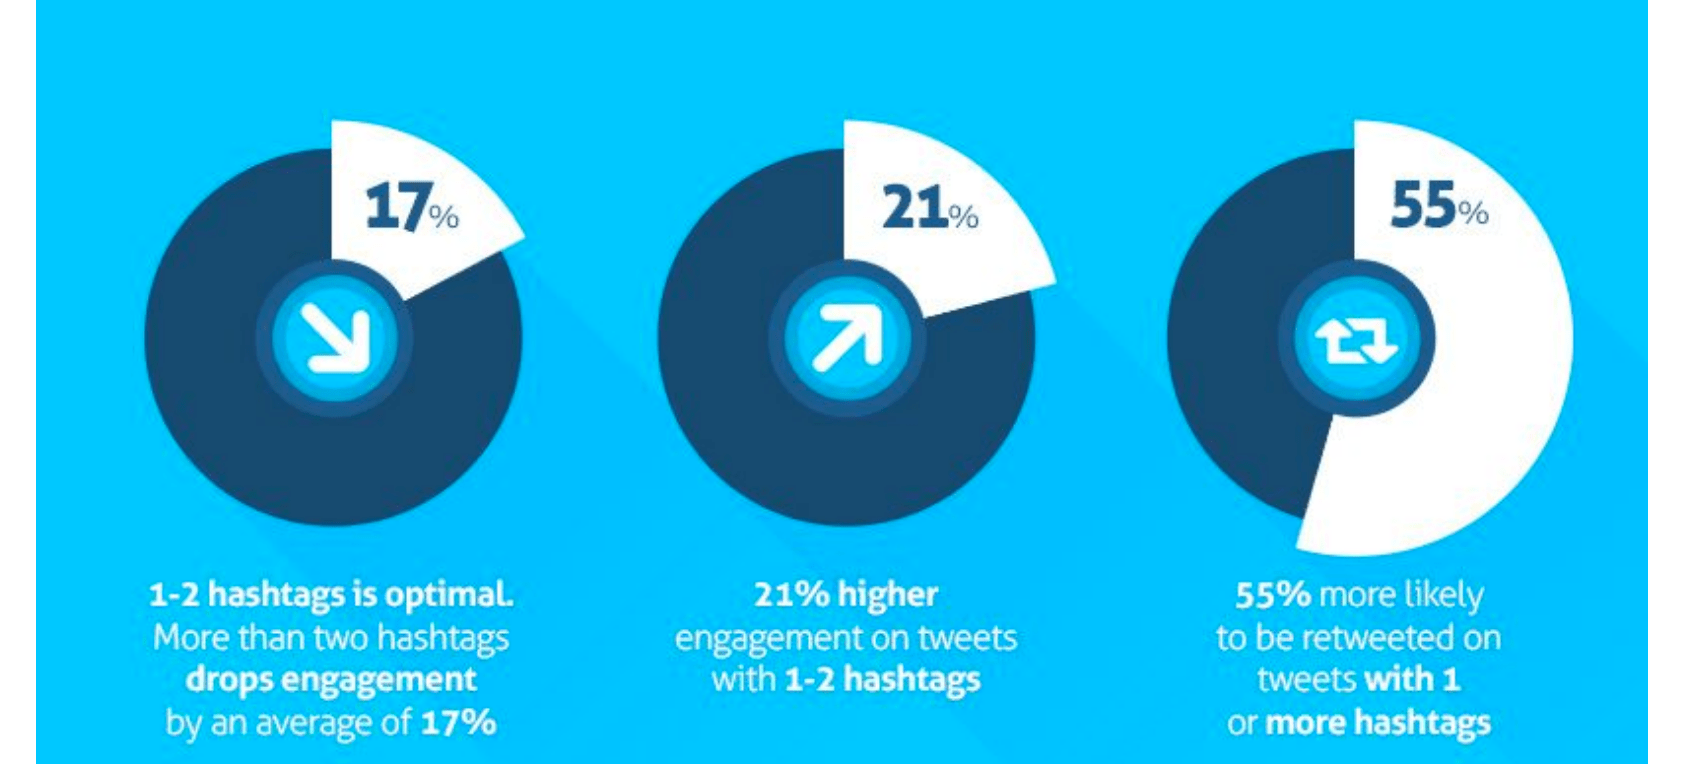 hashtag tips for social media managers